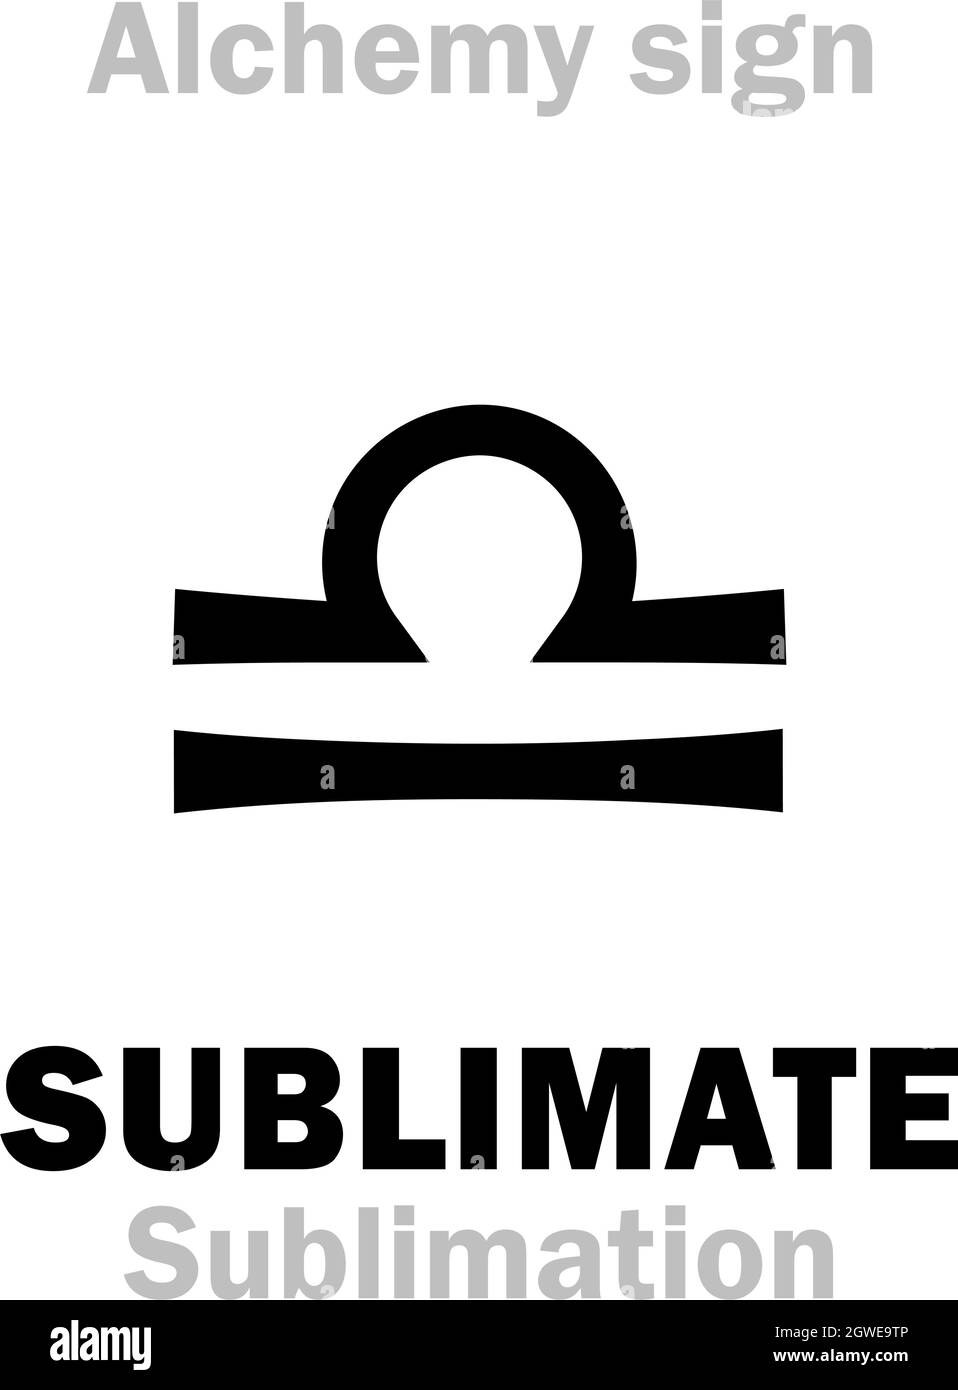 Alchemy Alphabet: SUBLIME, SUBLIMATE, SUBLIMATION — transition of substance from solid state bypassing liquid phase directly into gasiform. Stock Vector